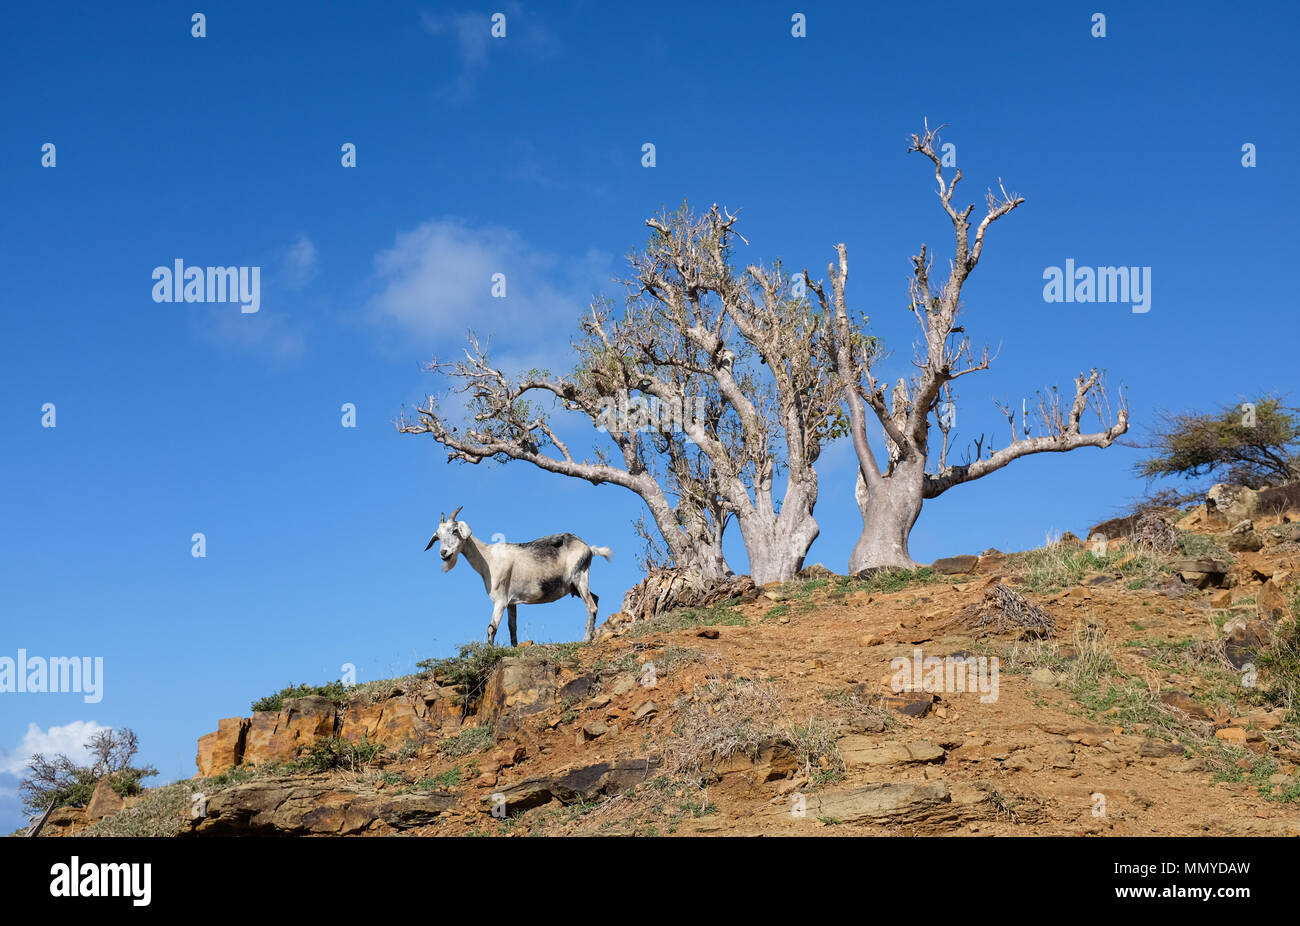 Antigua Lesser Antilles islands in the Caribbean West Indies - Wild goat with tree on rugged landscape Stock Photo